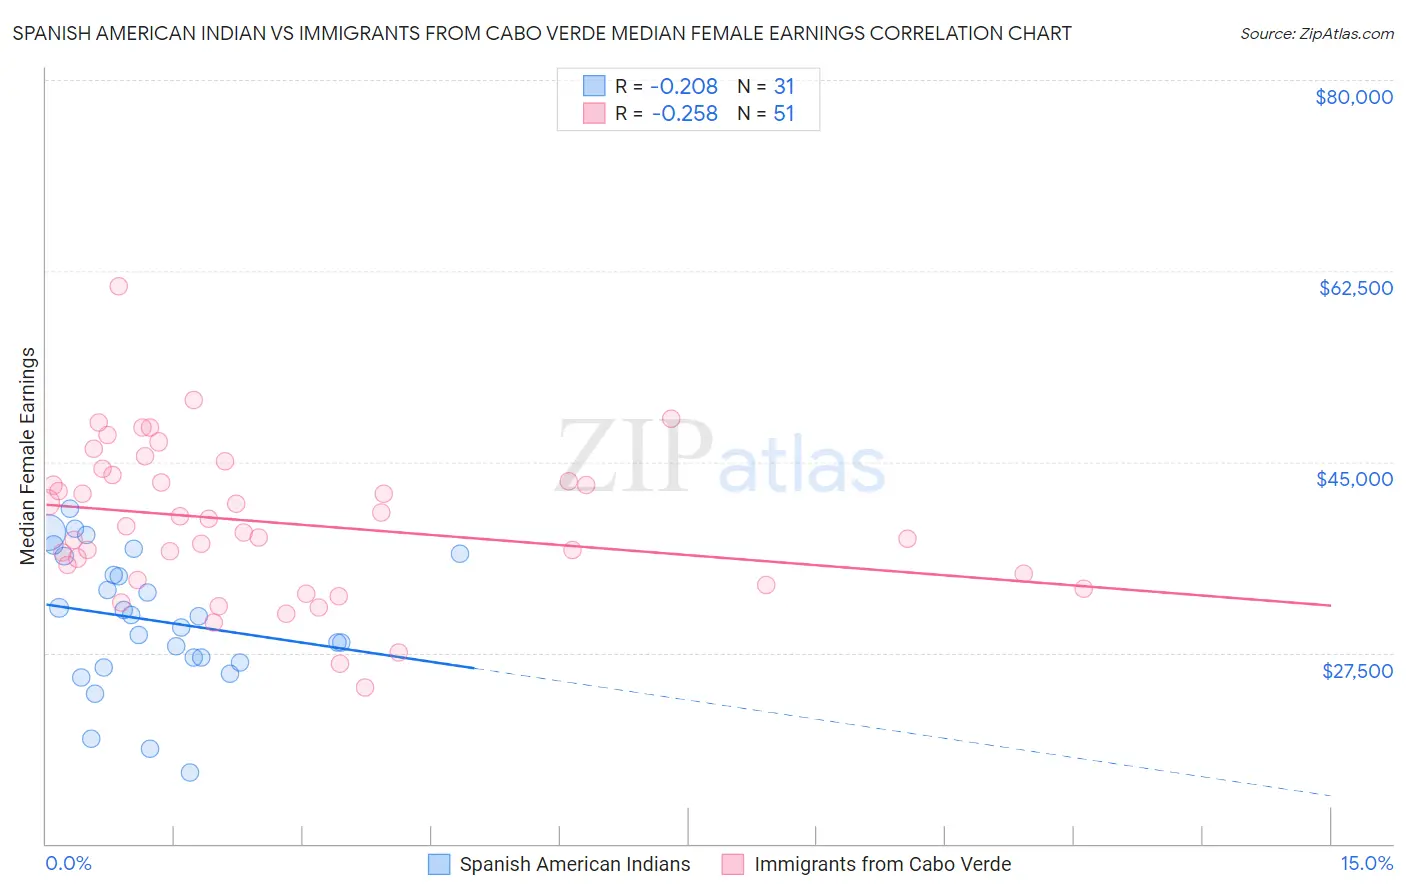 Spanish American Indian vs Immigrants from Cabo Verde Median Female Earnings